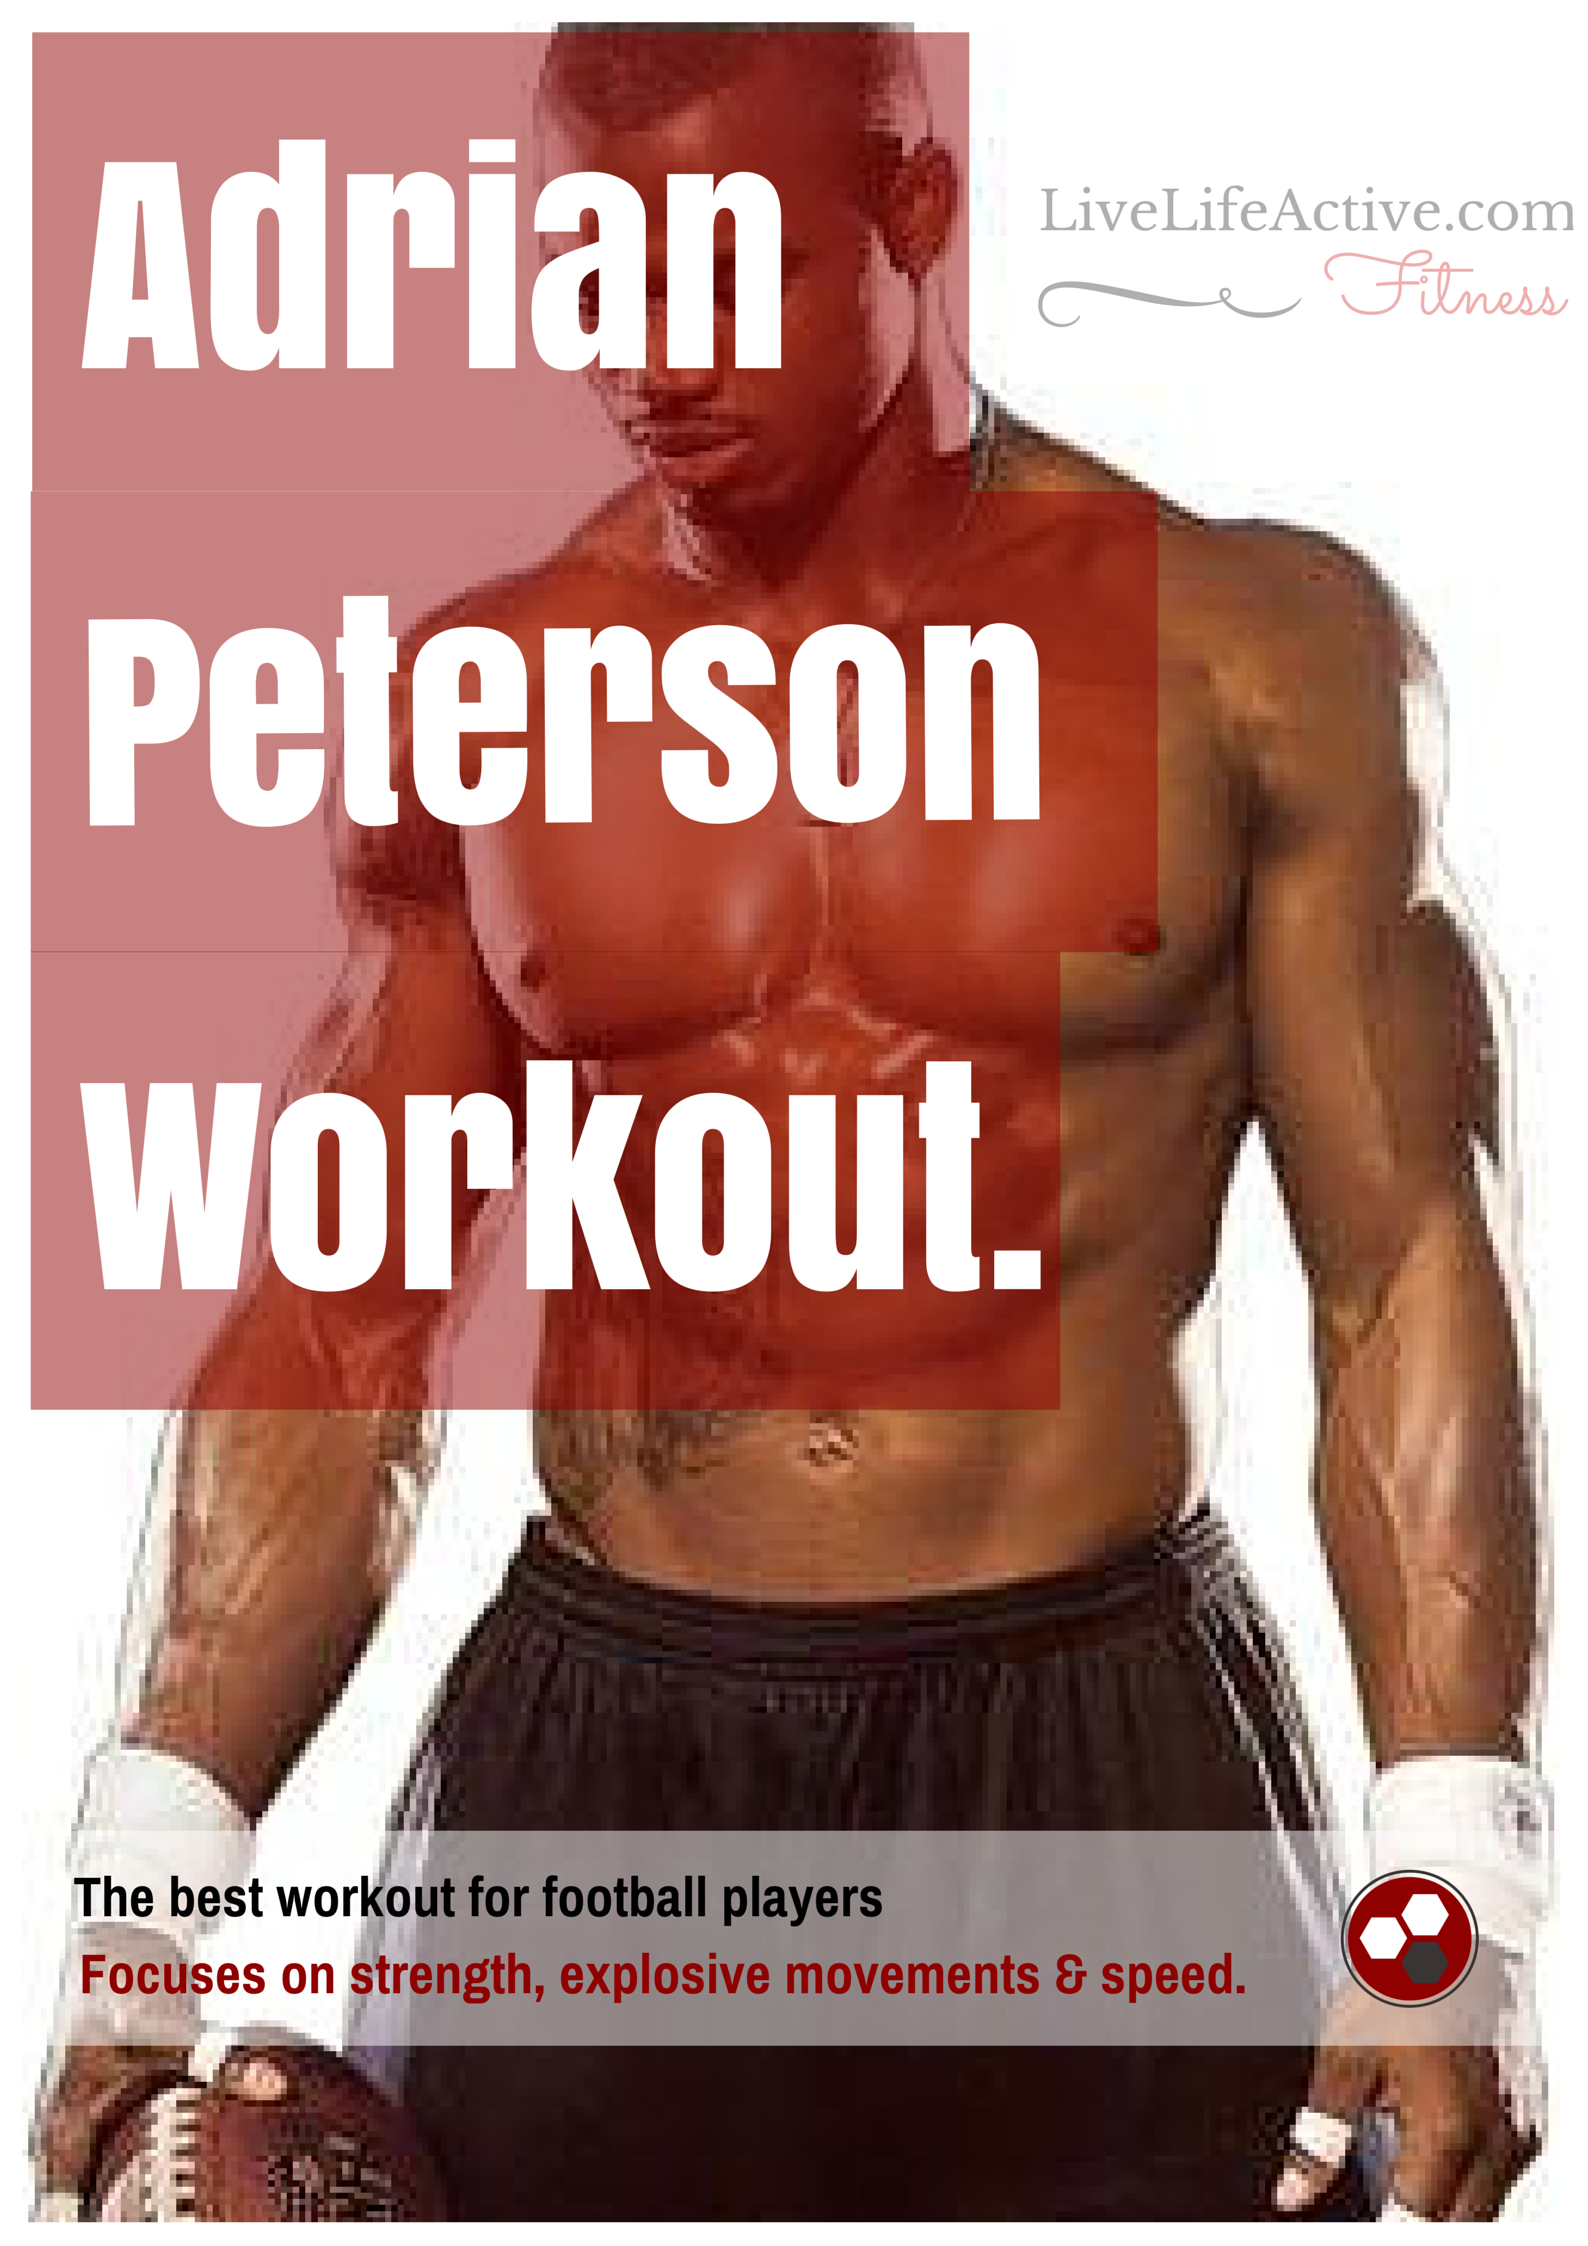 adrian peterson workout